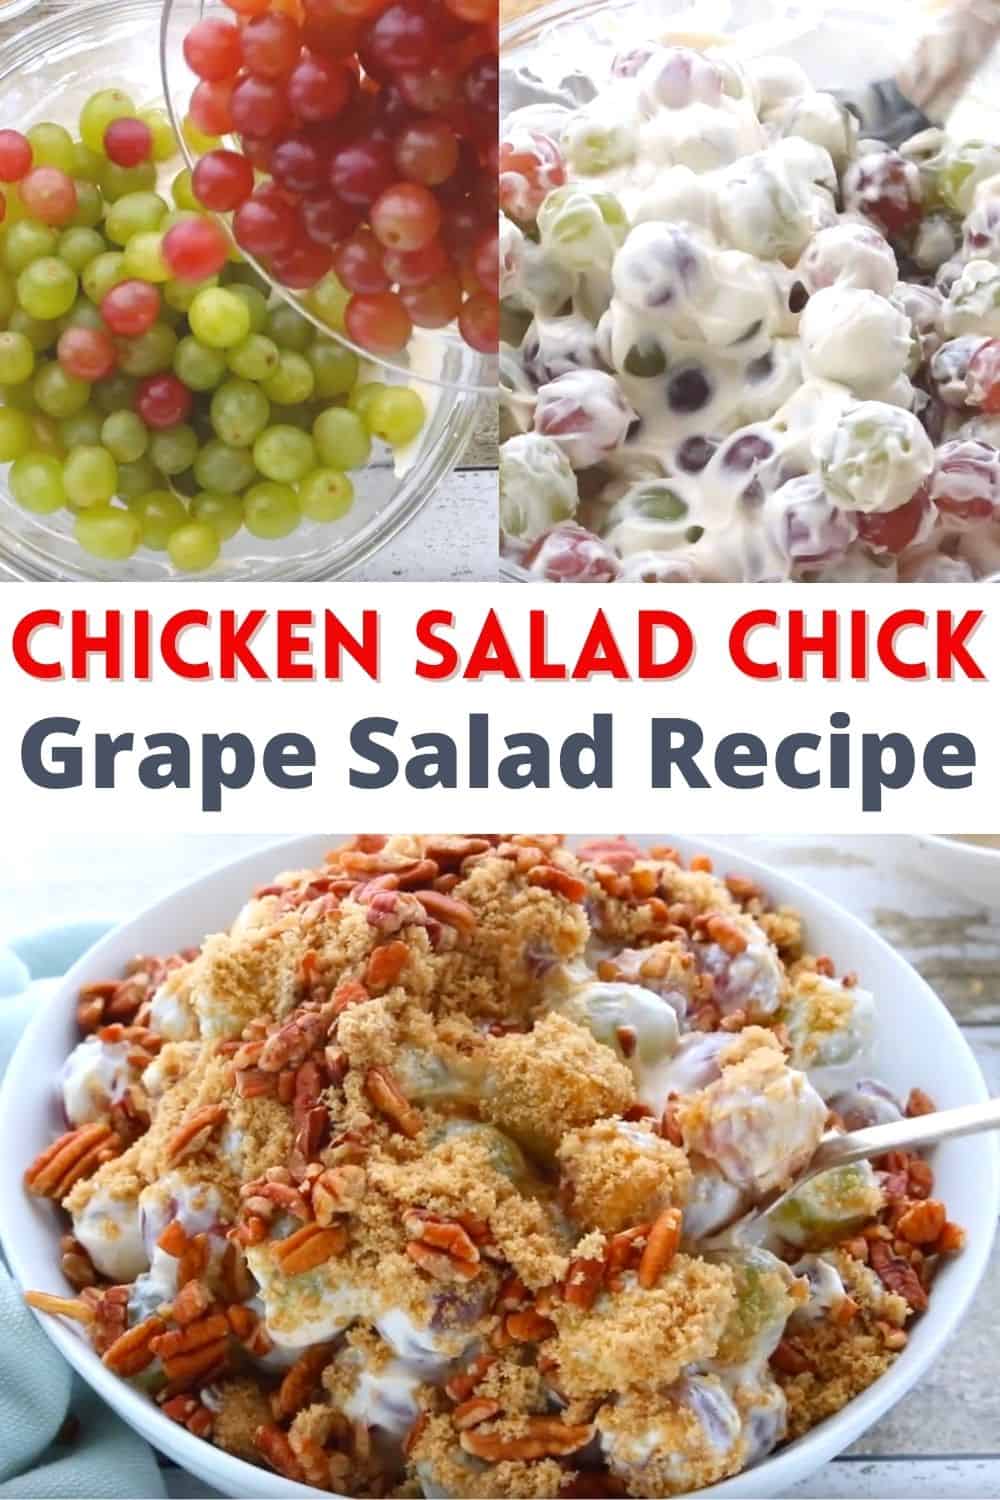 This grape salad is a copycat recipe of Chicken Salad Chick's side dish. This is the BEST creamy grape salad with a crunchy brown sugar pecan topping.